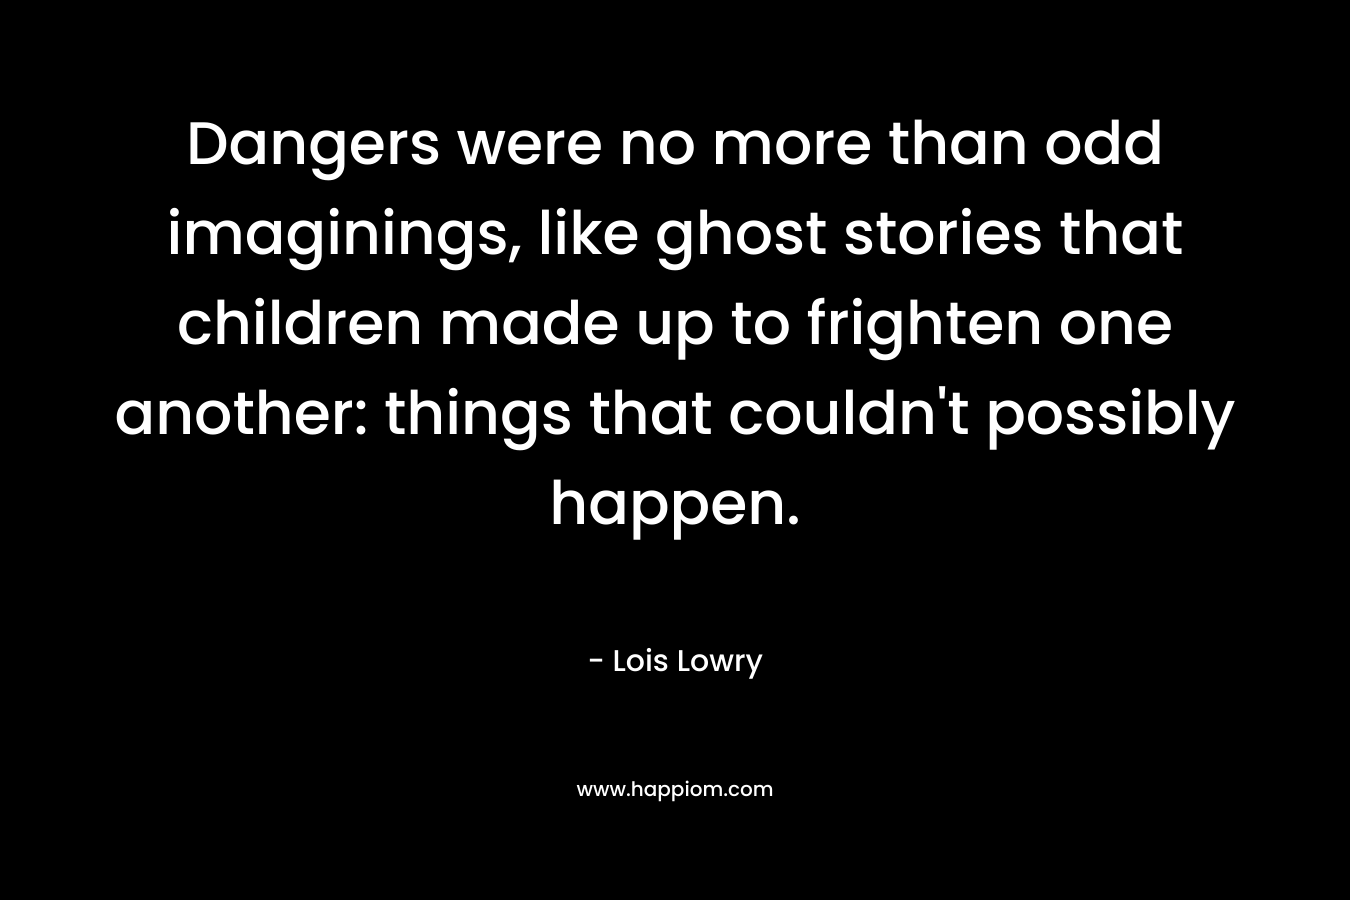 Dangers were no more than odd imaginings, like ghost stories that children made up to frighten one another: things that couldn’t possibly happen. – Lois Lowry